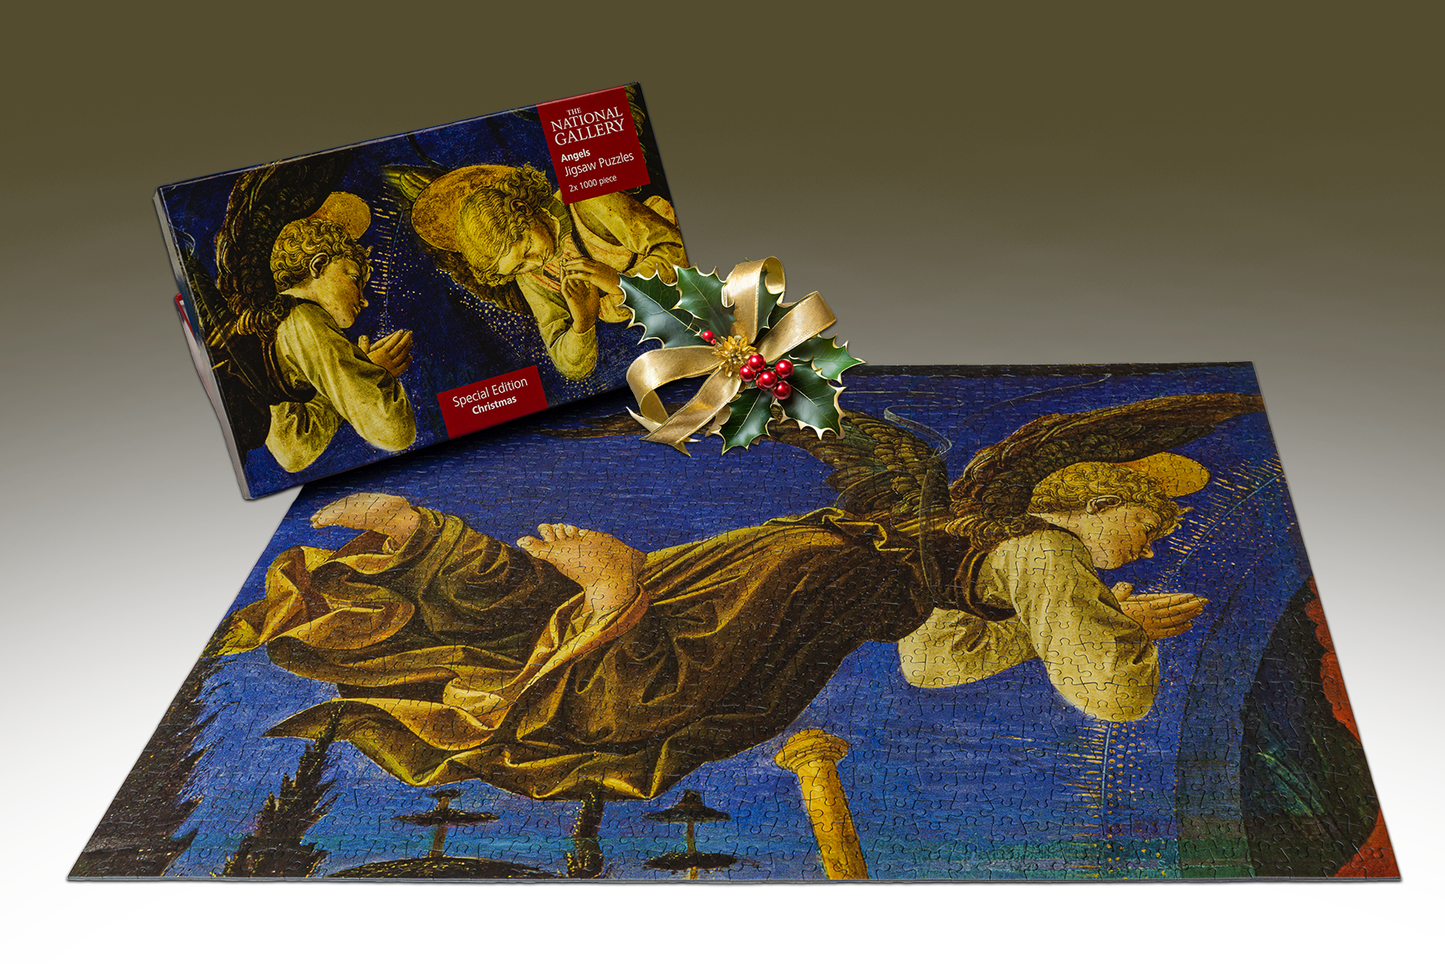 Angels - National Gallery Special Edition 2 x 1000 Piece Jigsaw Puzzle